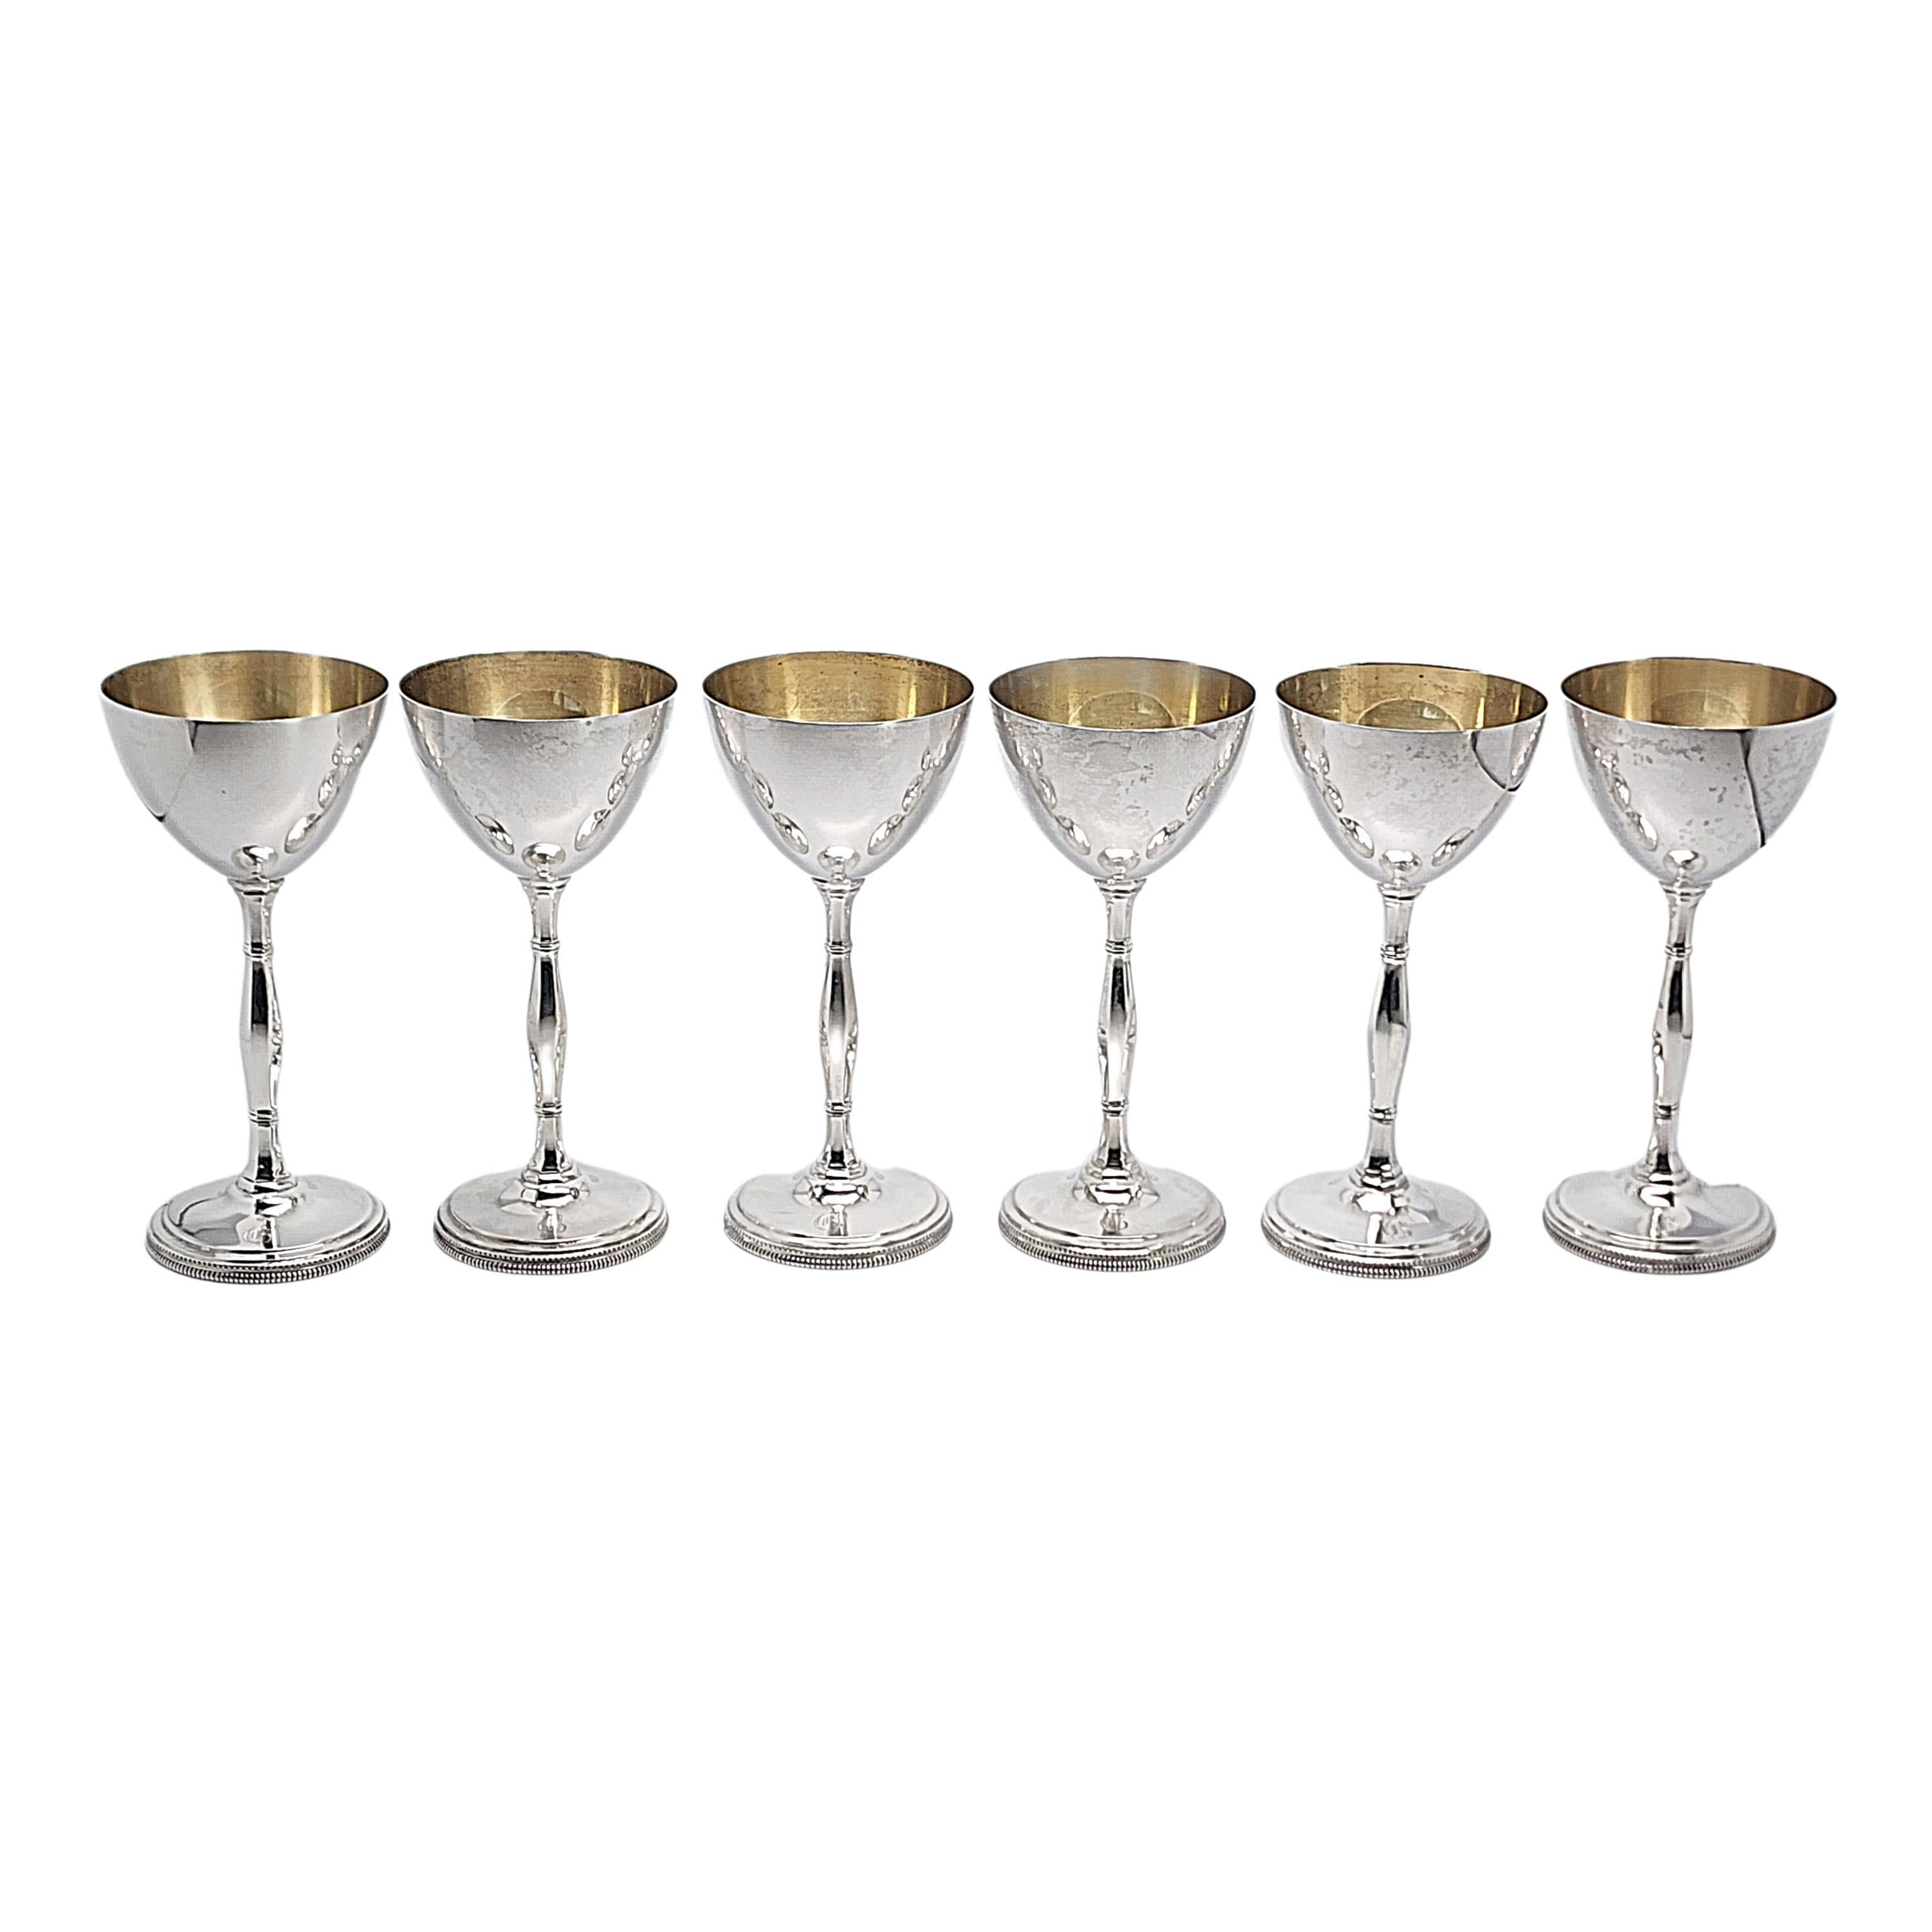 Set of 6 sterling silver champagne or cocktail chalice/goblets by Cartier.

Engraving appears to be the letter G on the base of each goblet (see photo).

A simple and classic polished design with gold wash interior bowl. Long stem and shallow cup.